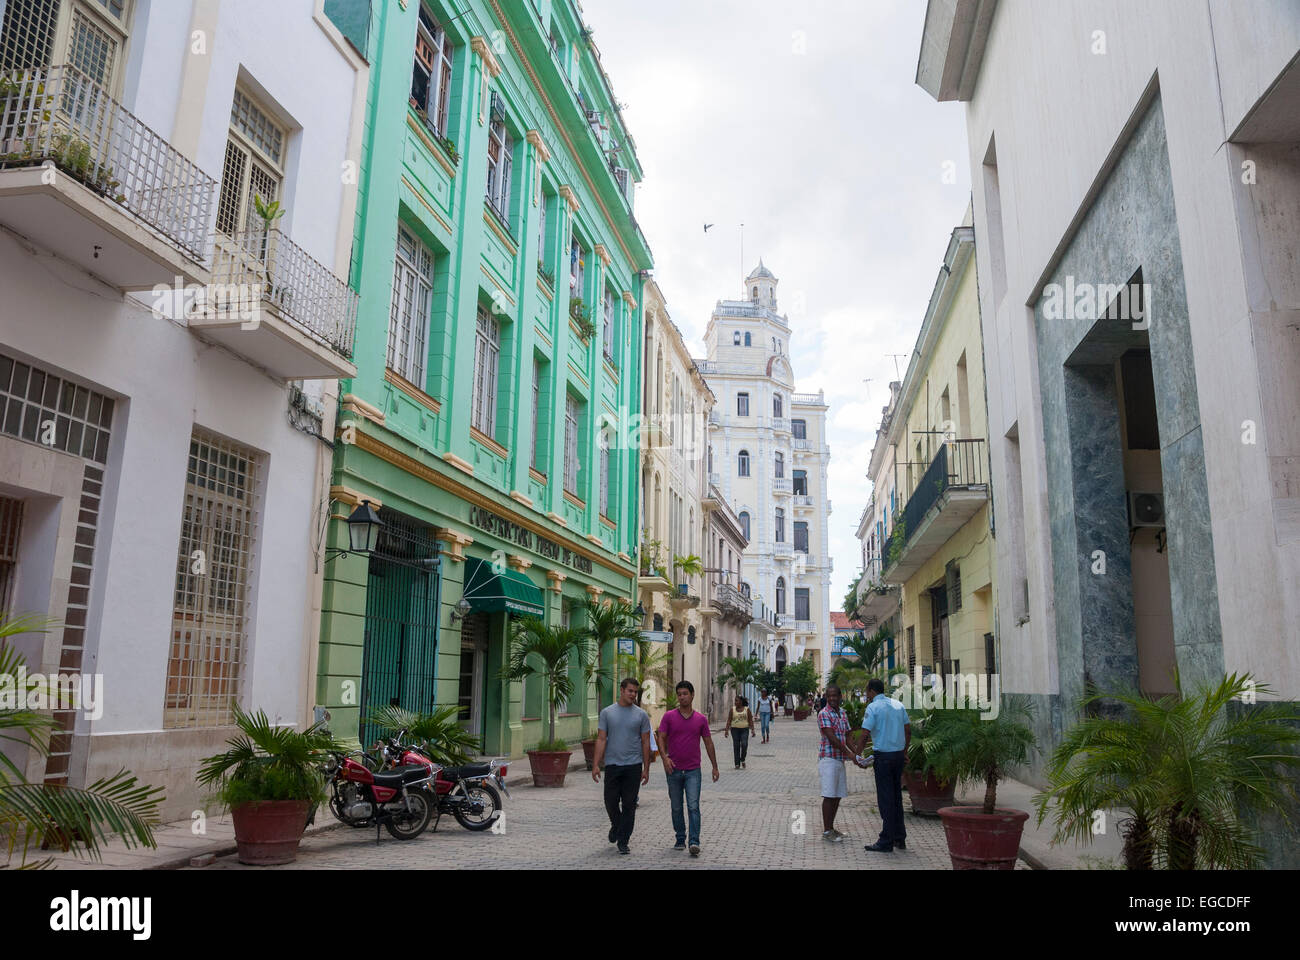 A downtown street scene in the old part of downtown Havana Cuba  with tourists and locals admiring the restored colonial buildings and narrow streets. Stock Photo